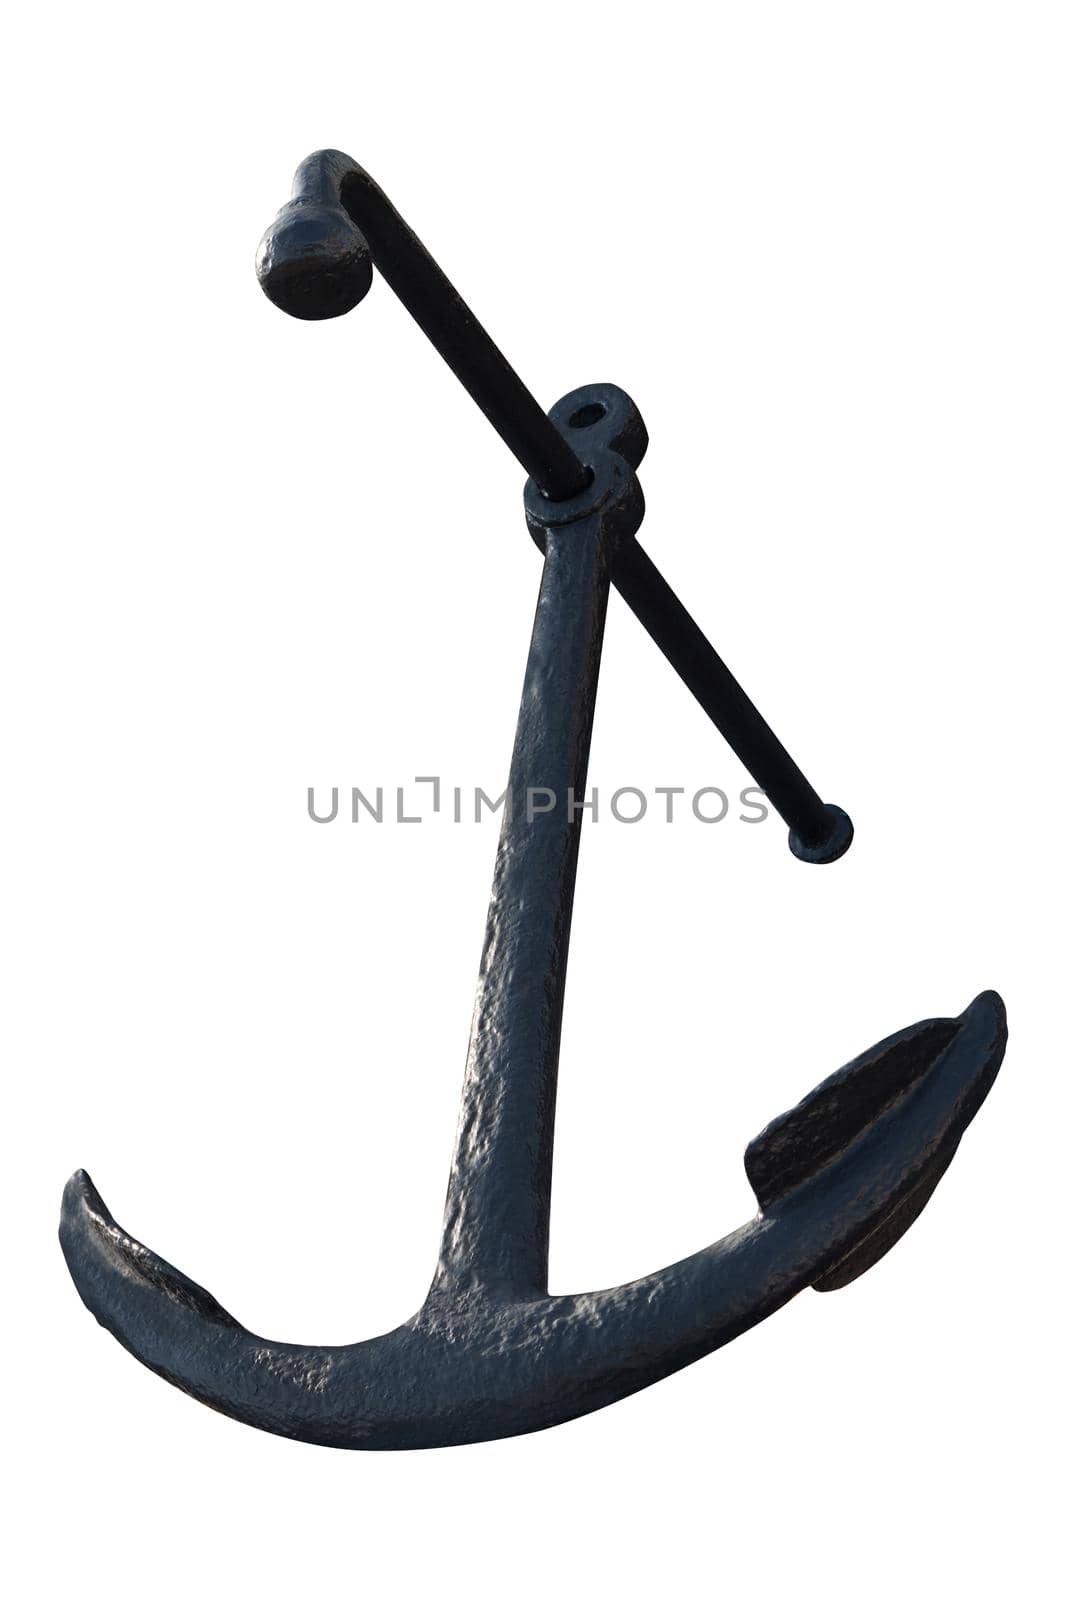 Nineteenth century admiral's anchor on white background isolated